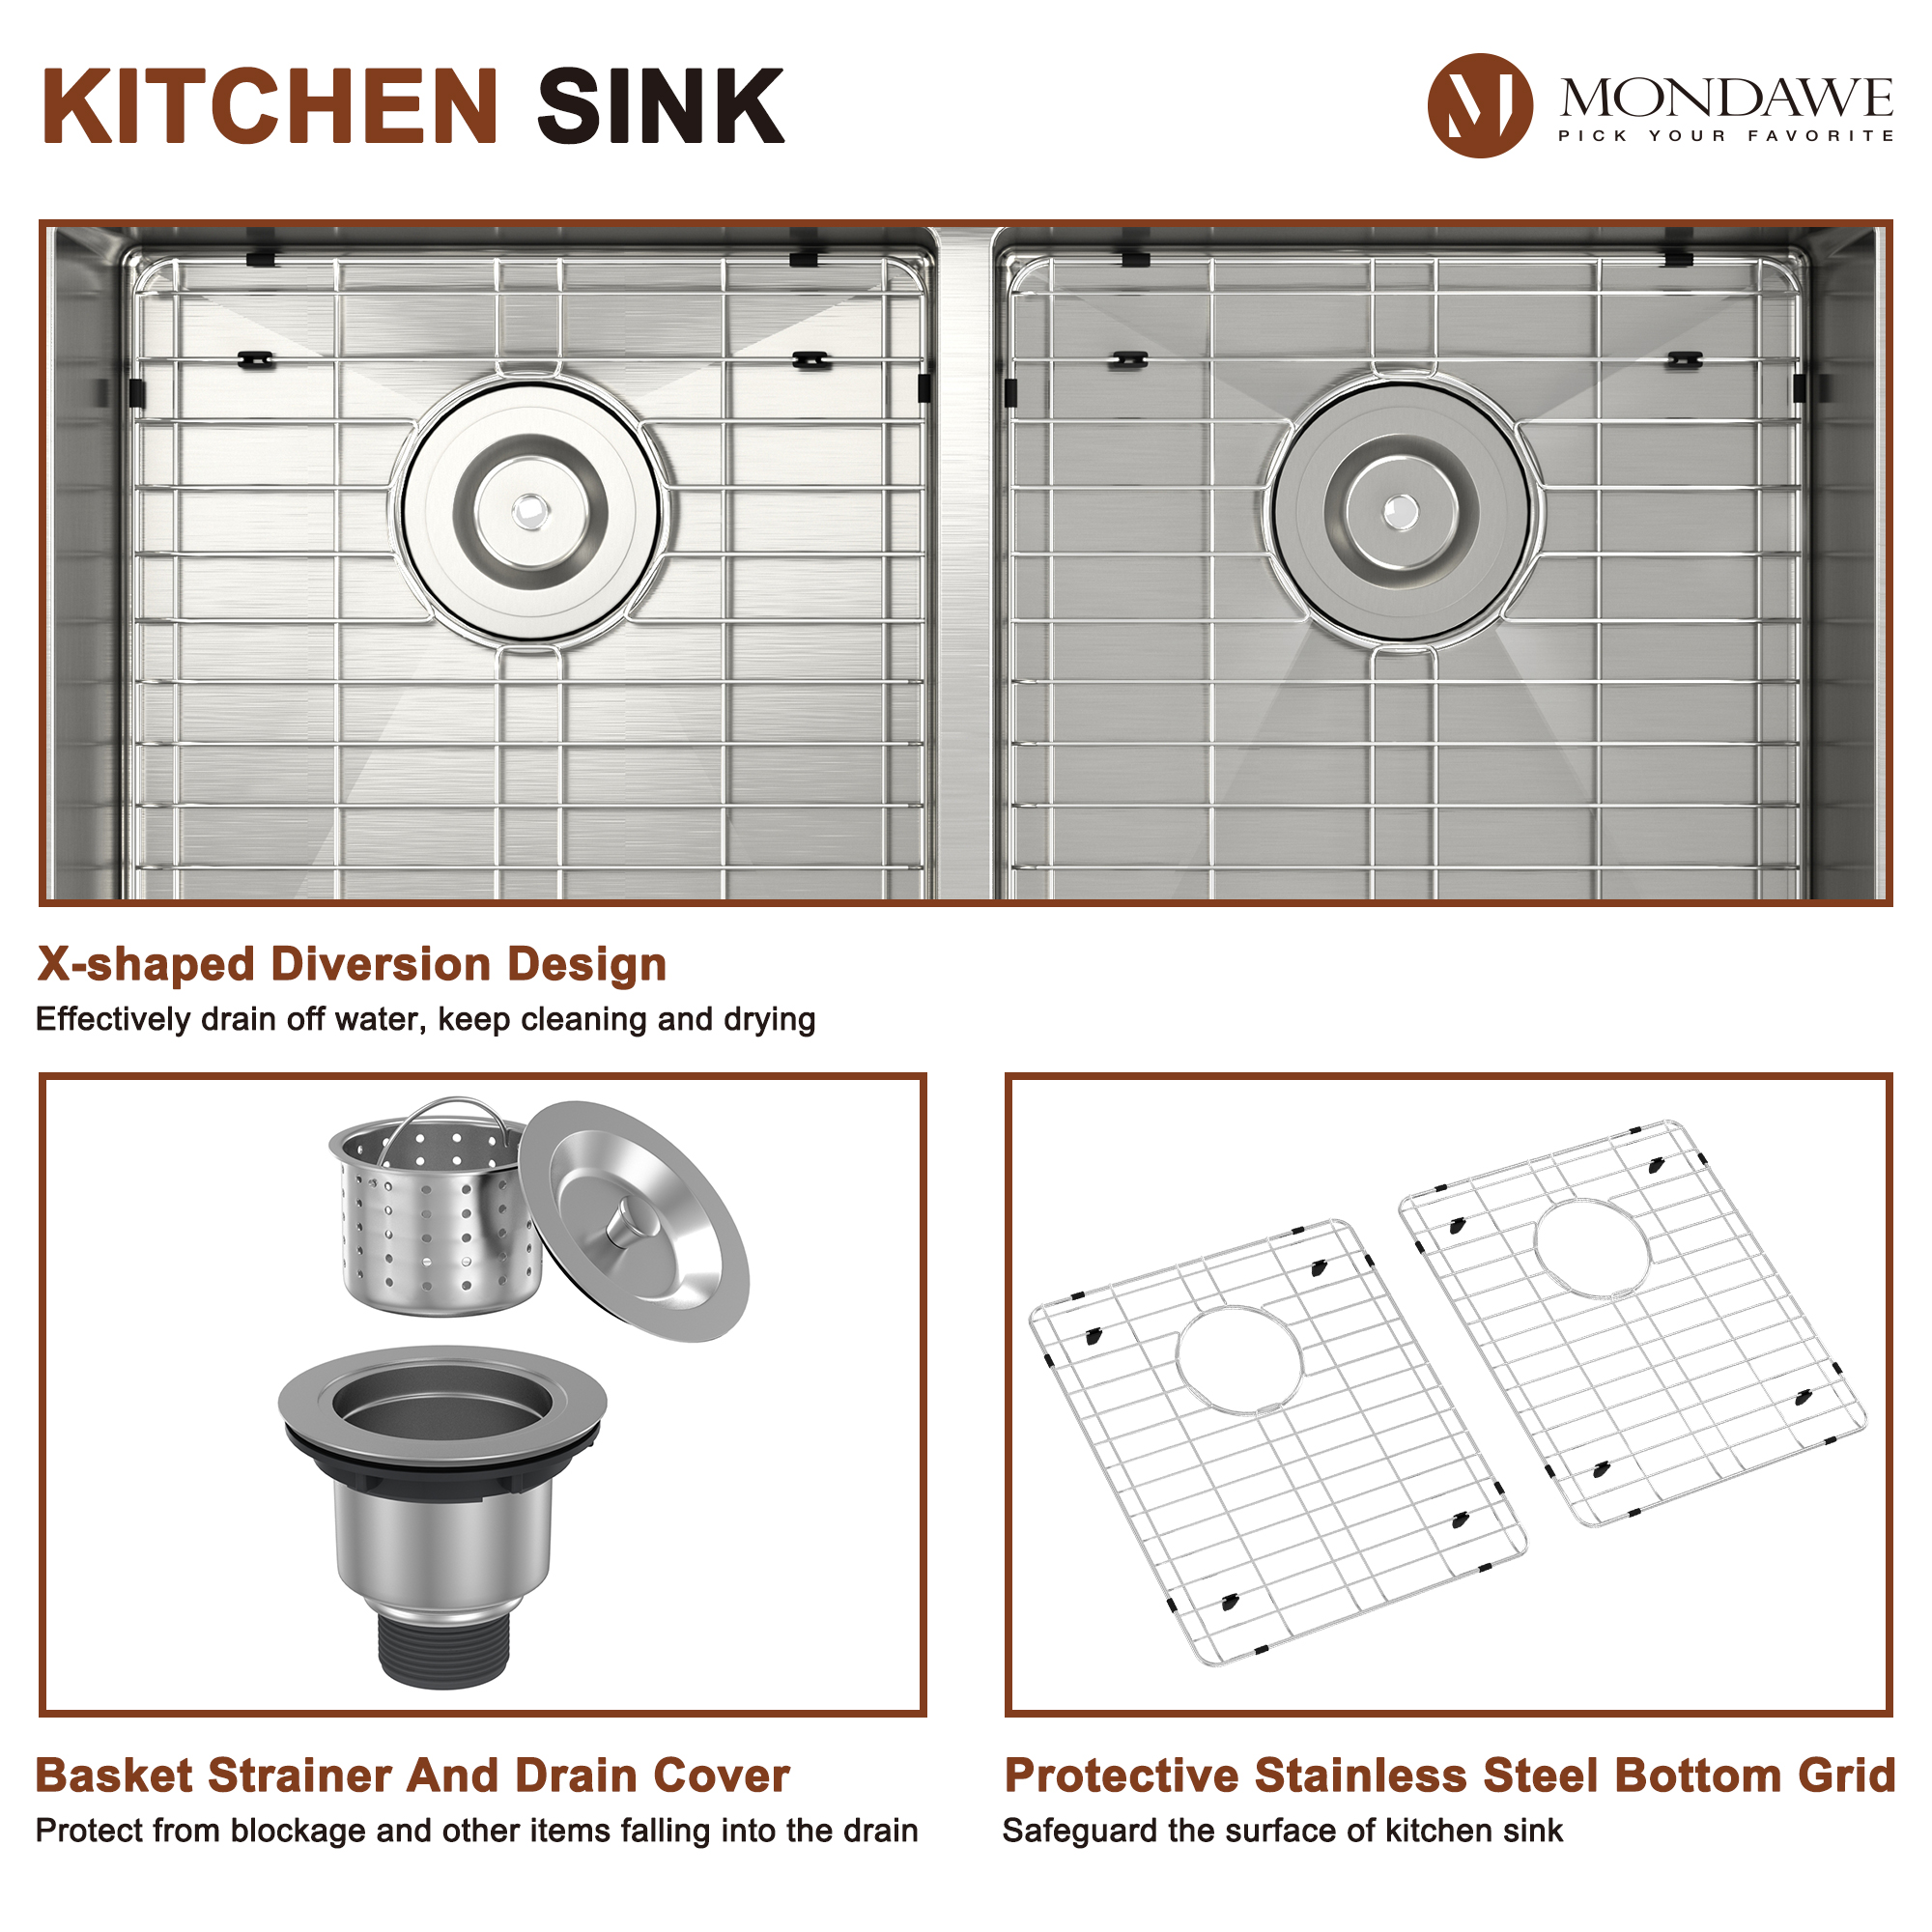 Undermount 33-in x 19-in Brushed Stainless Steel Double Bowl Kitchen Sink-Mondawe